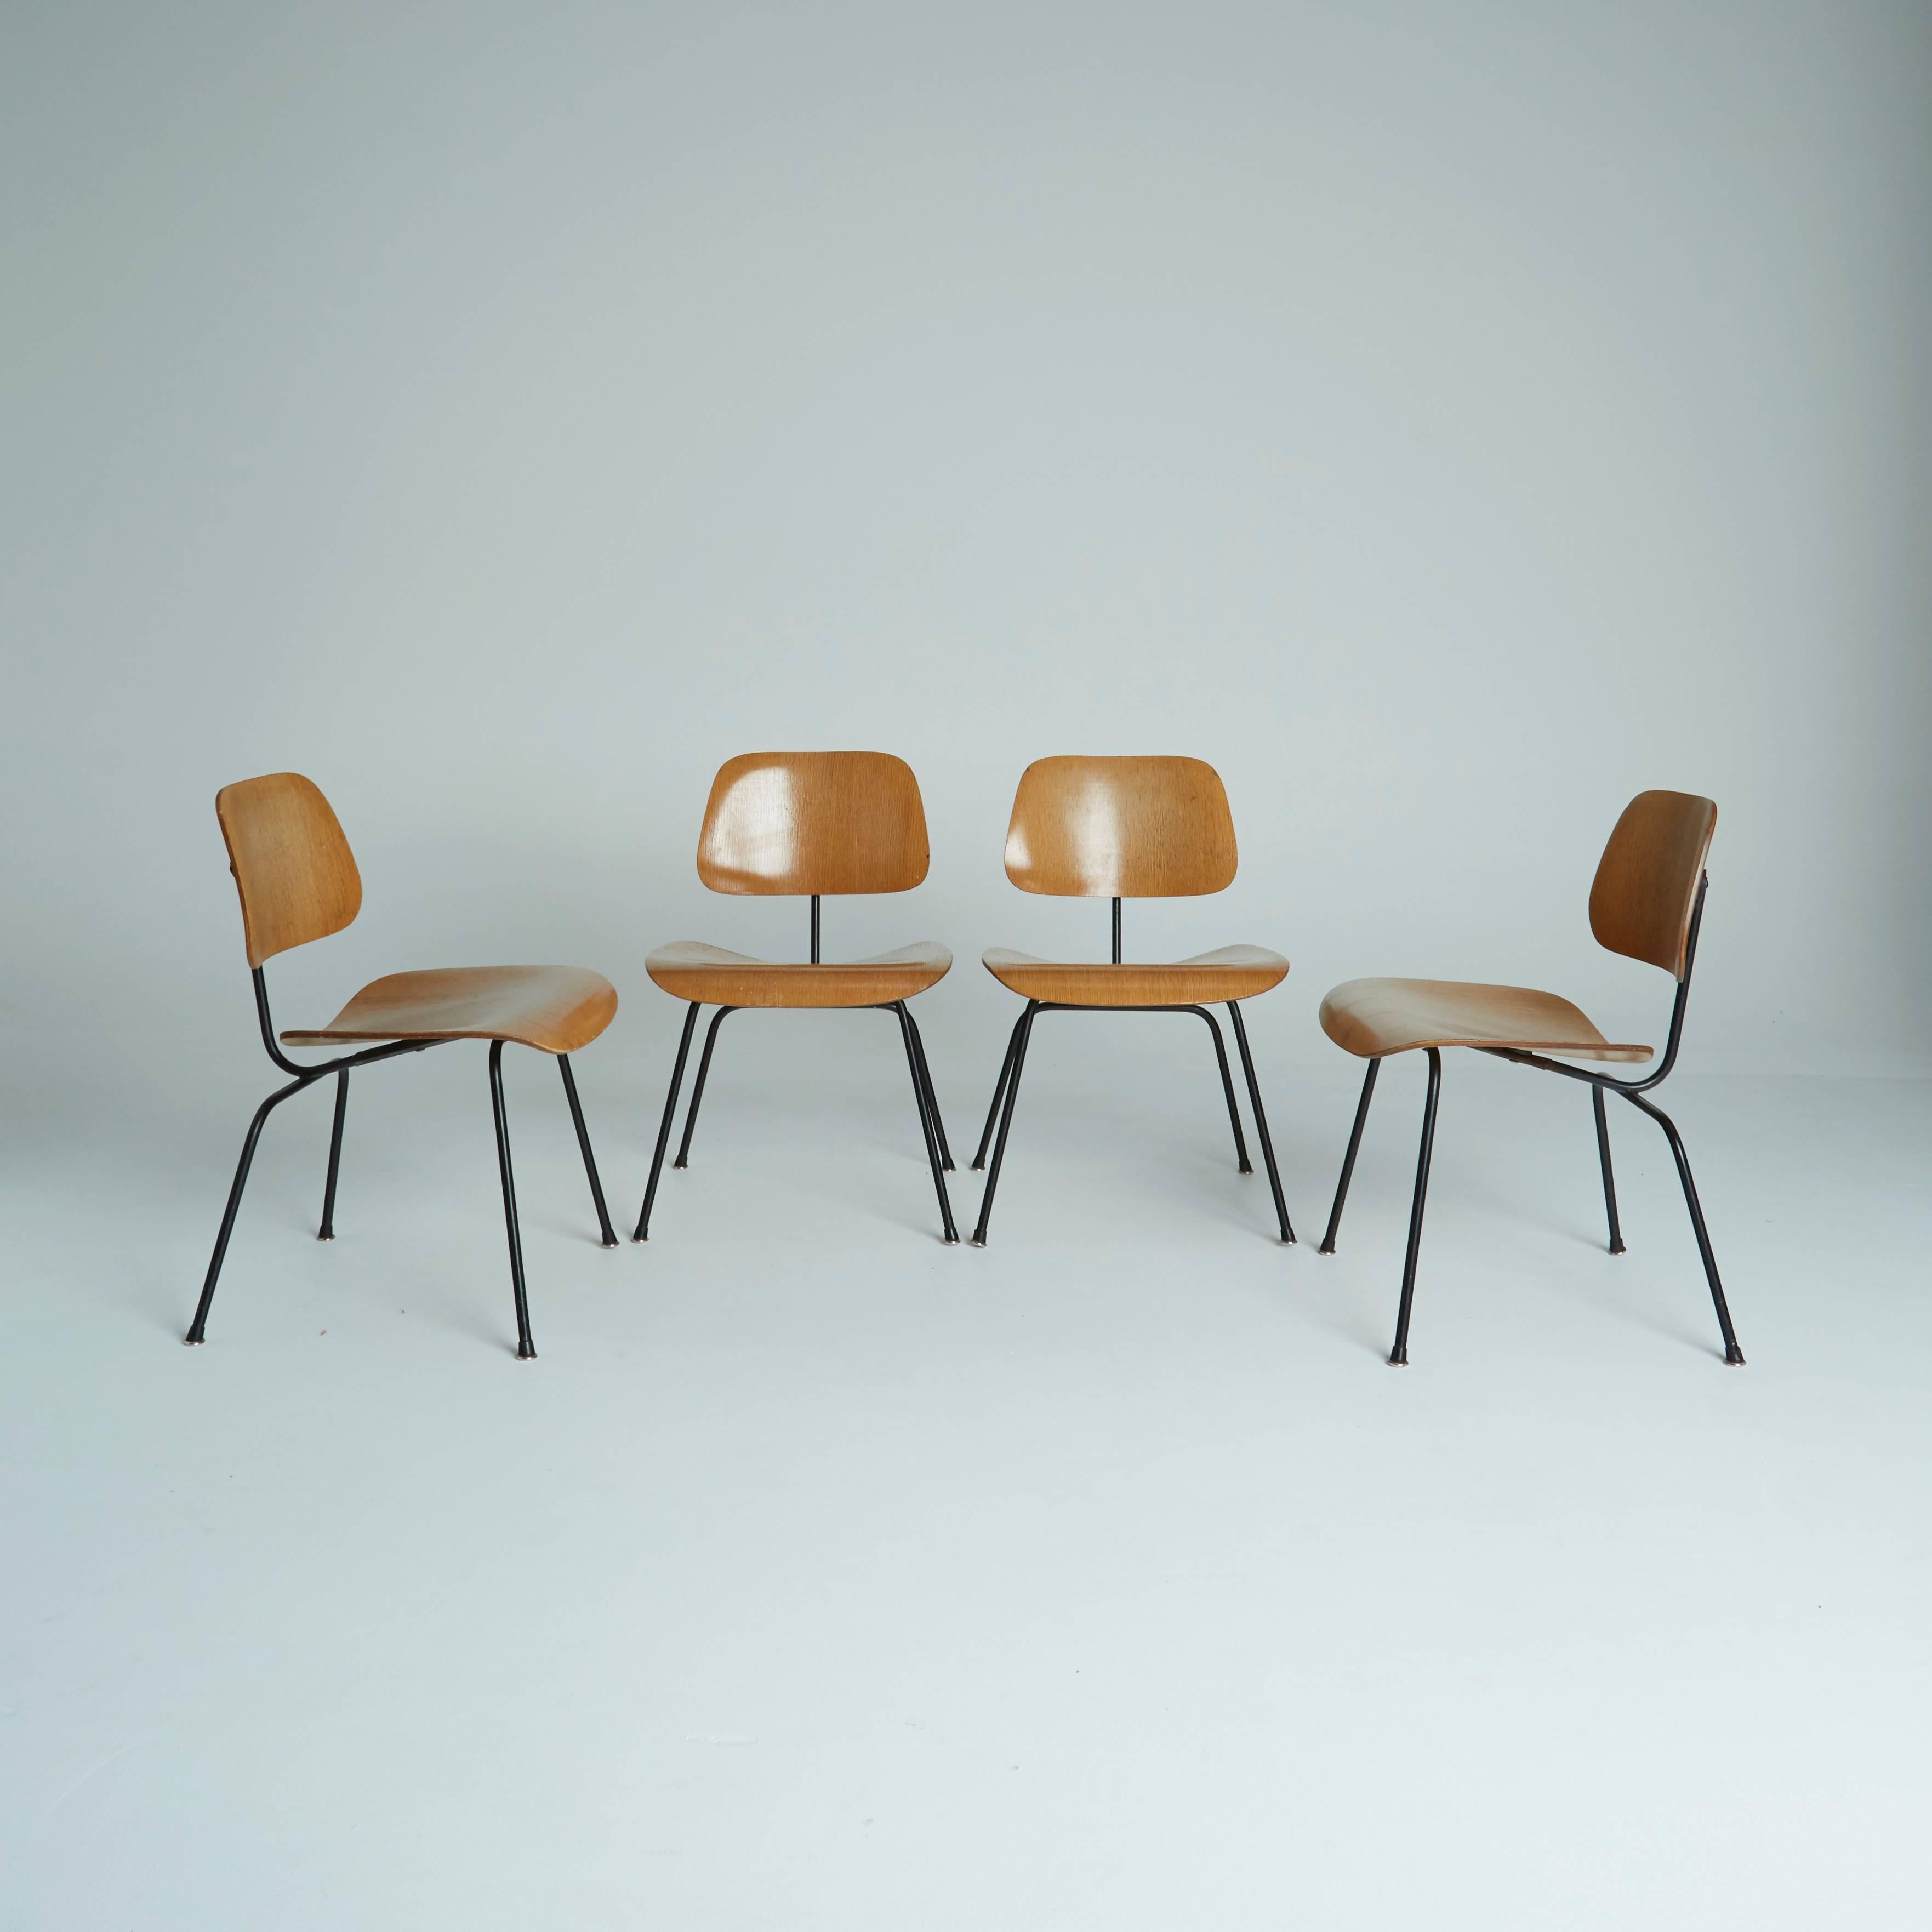 As with all of Ray and Charles Eames designs, these oak DCM chairs are iconic, sleek and incredibly well designed. The combed-grain oak gives the molded wood panels an exceptional texture and is in stylish contrast to the dark steel frames. Designed